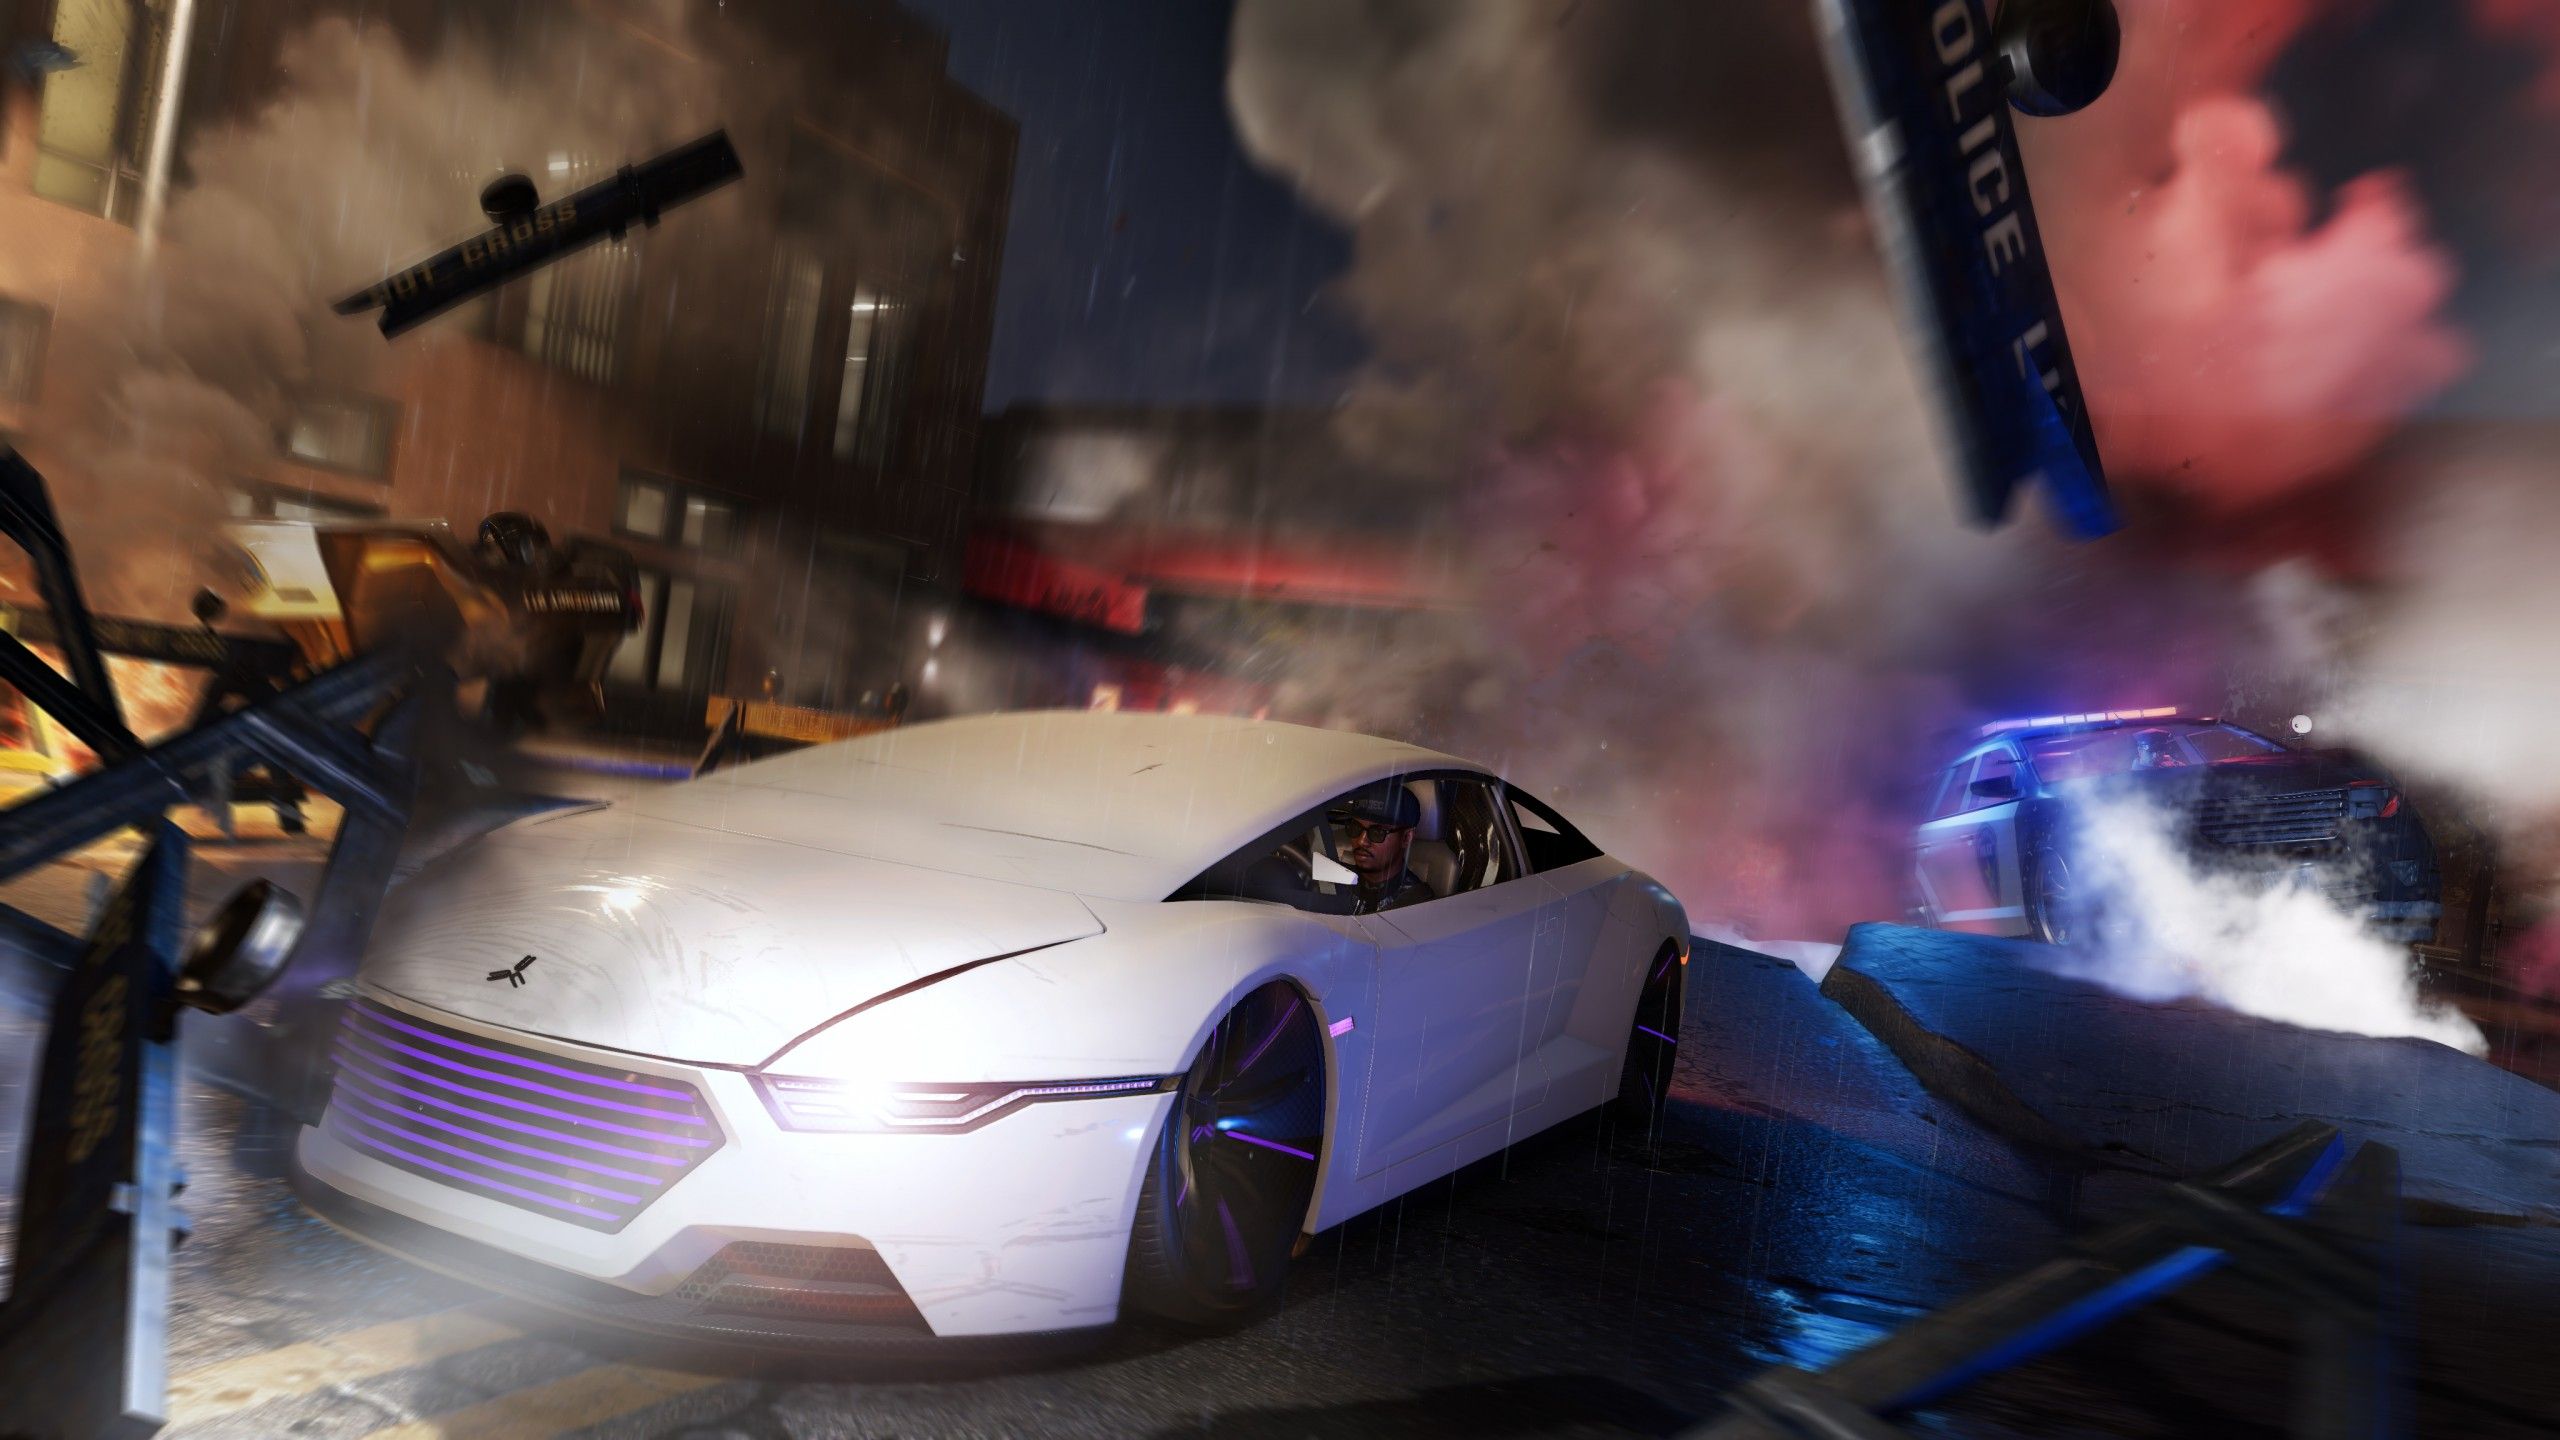 Wallpaper Police chase, Human Conditions, Watch Dogs DLC, 4K, Games,. Wallpaper for iPhone, Android, Mobile and Desktop